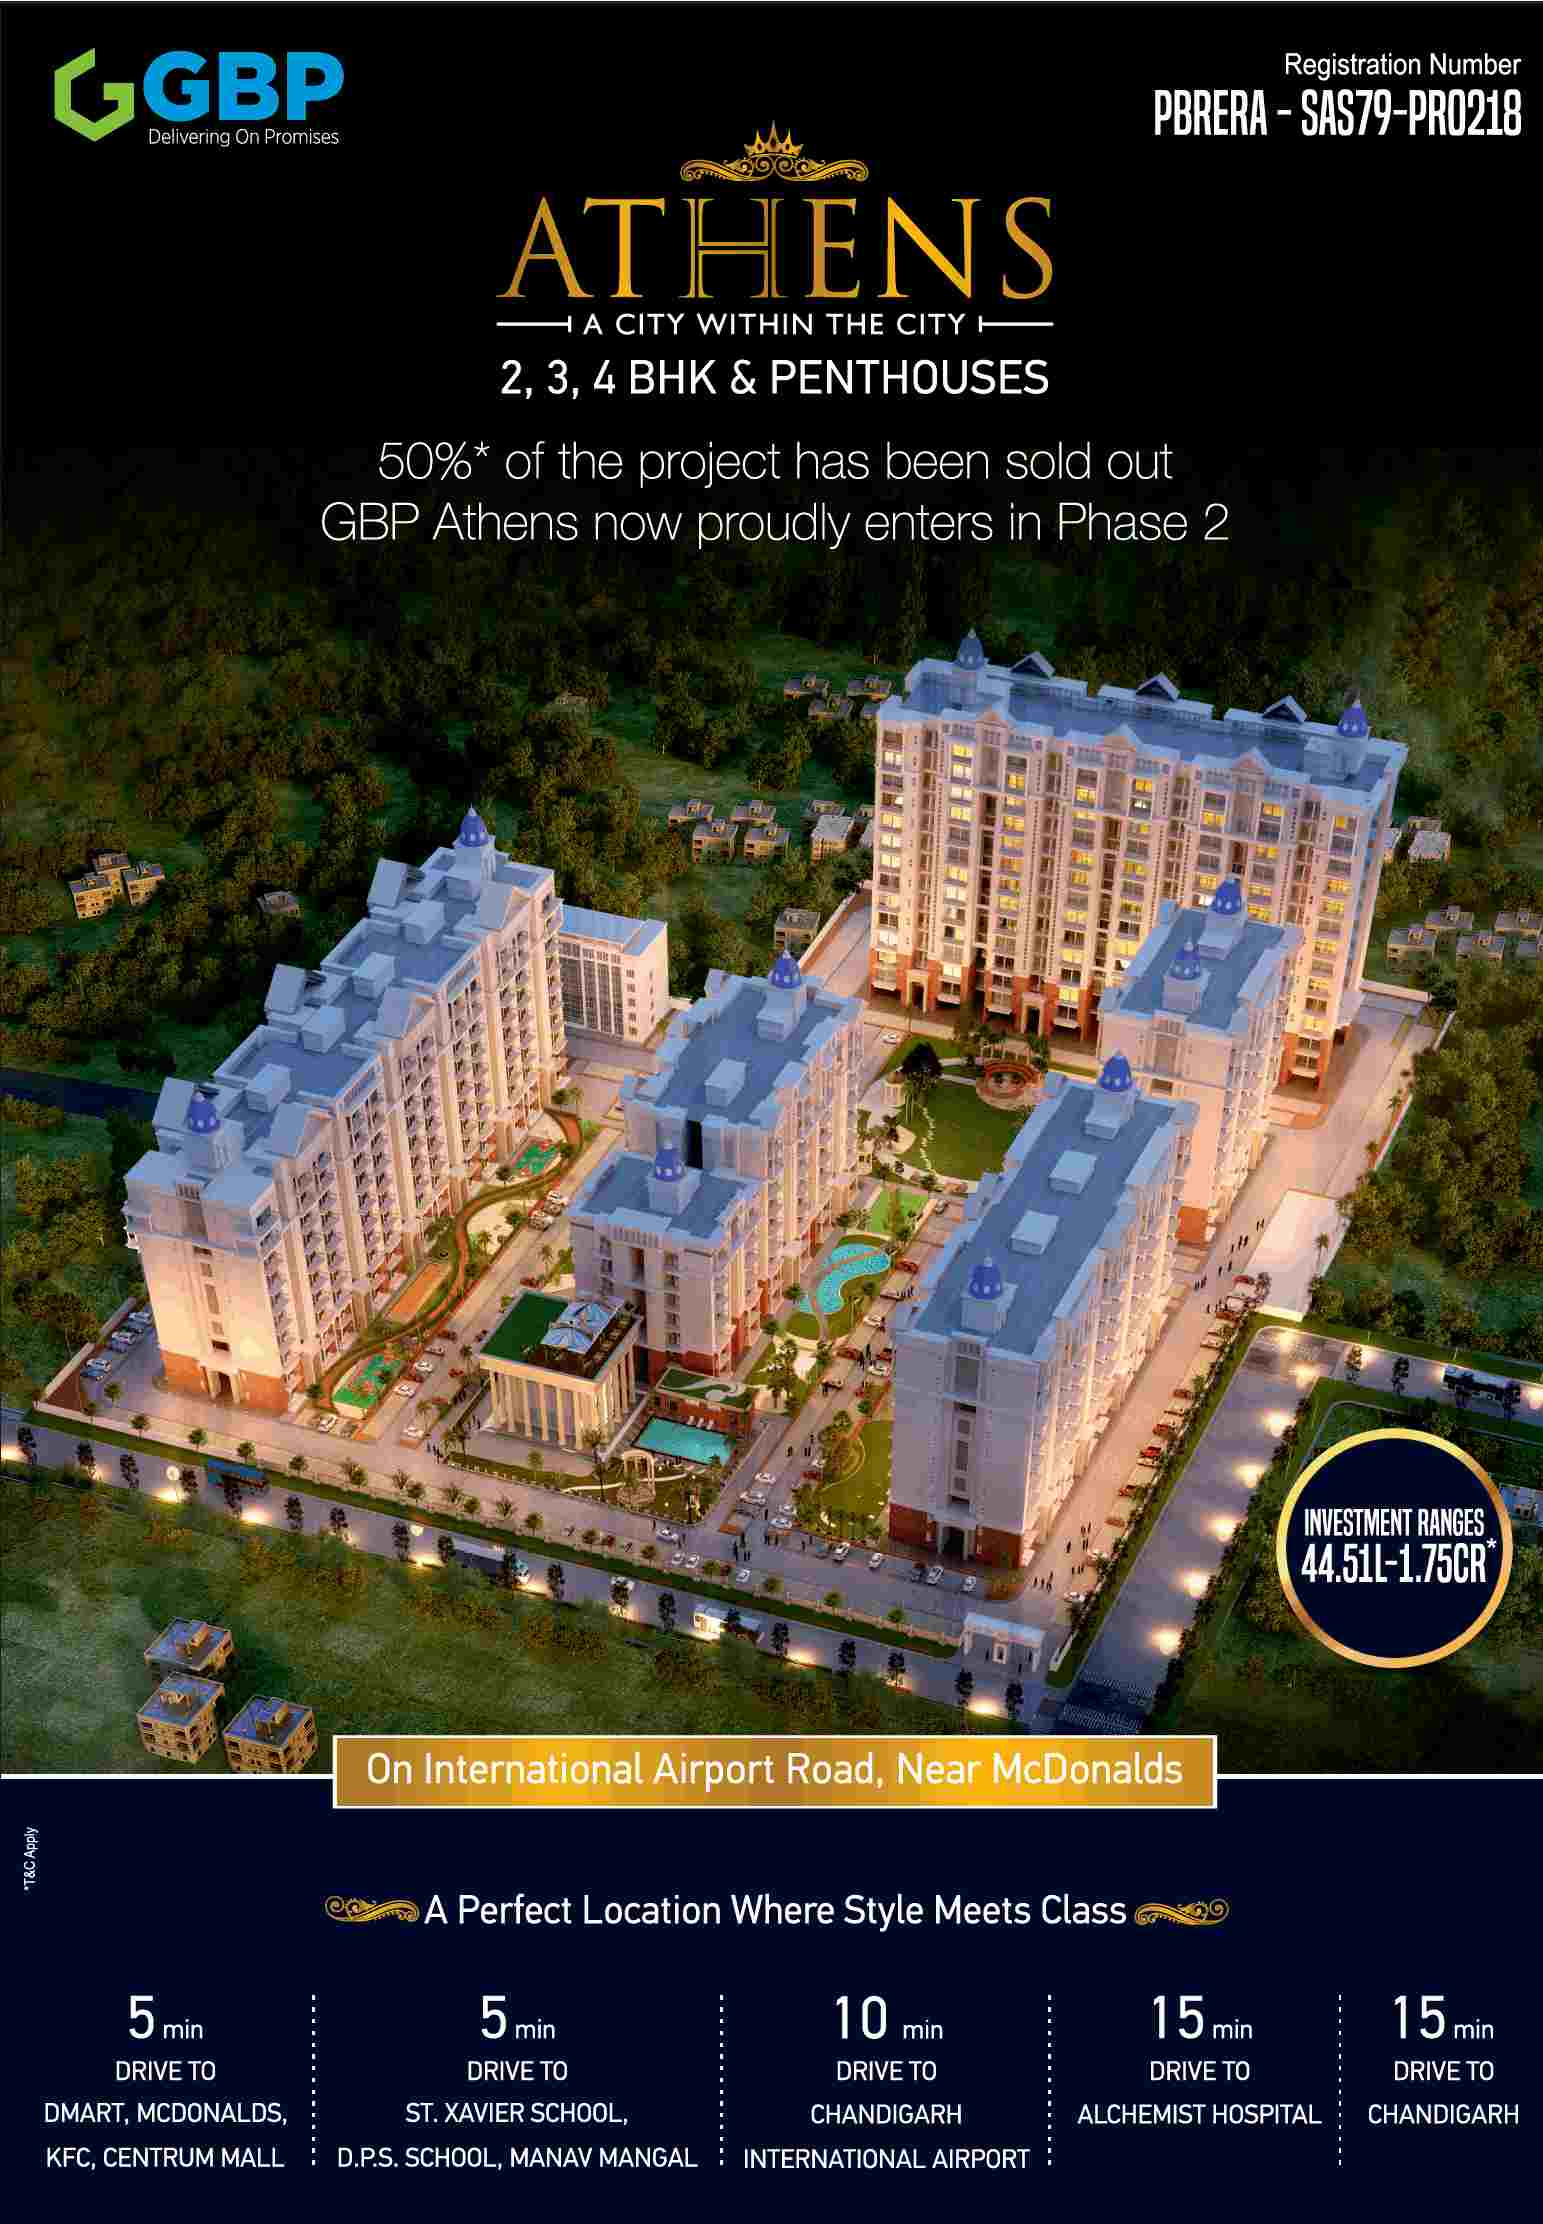 Live in a perfect location where style meets class at GBP Athens in Chandigarh Update